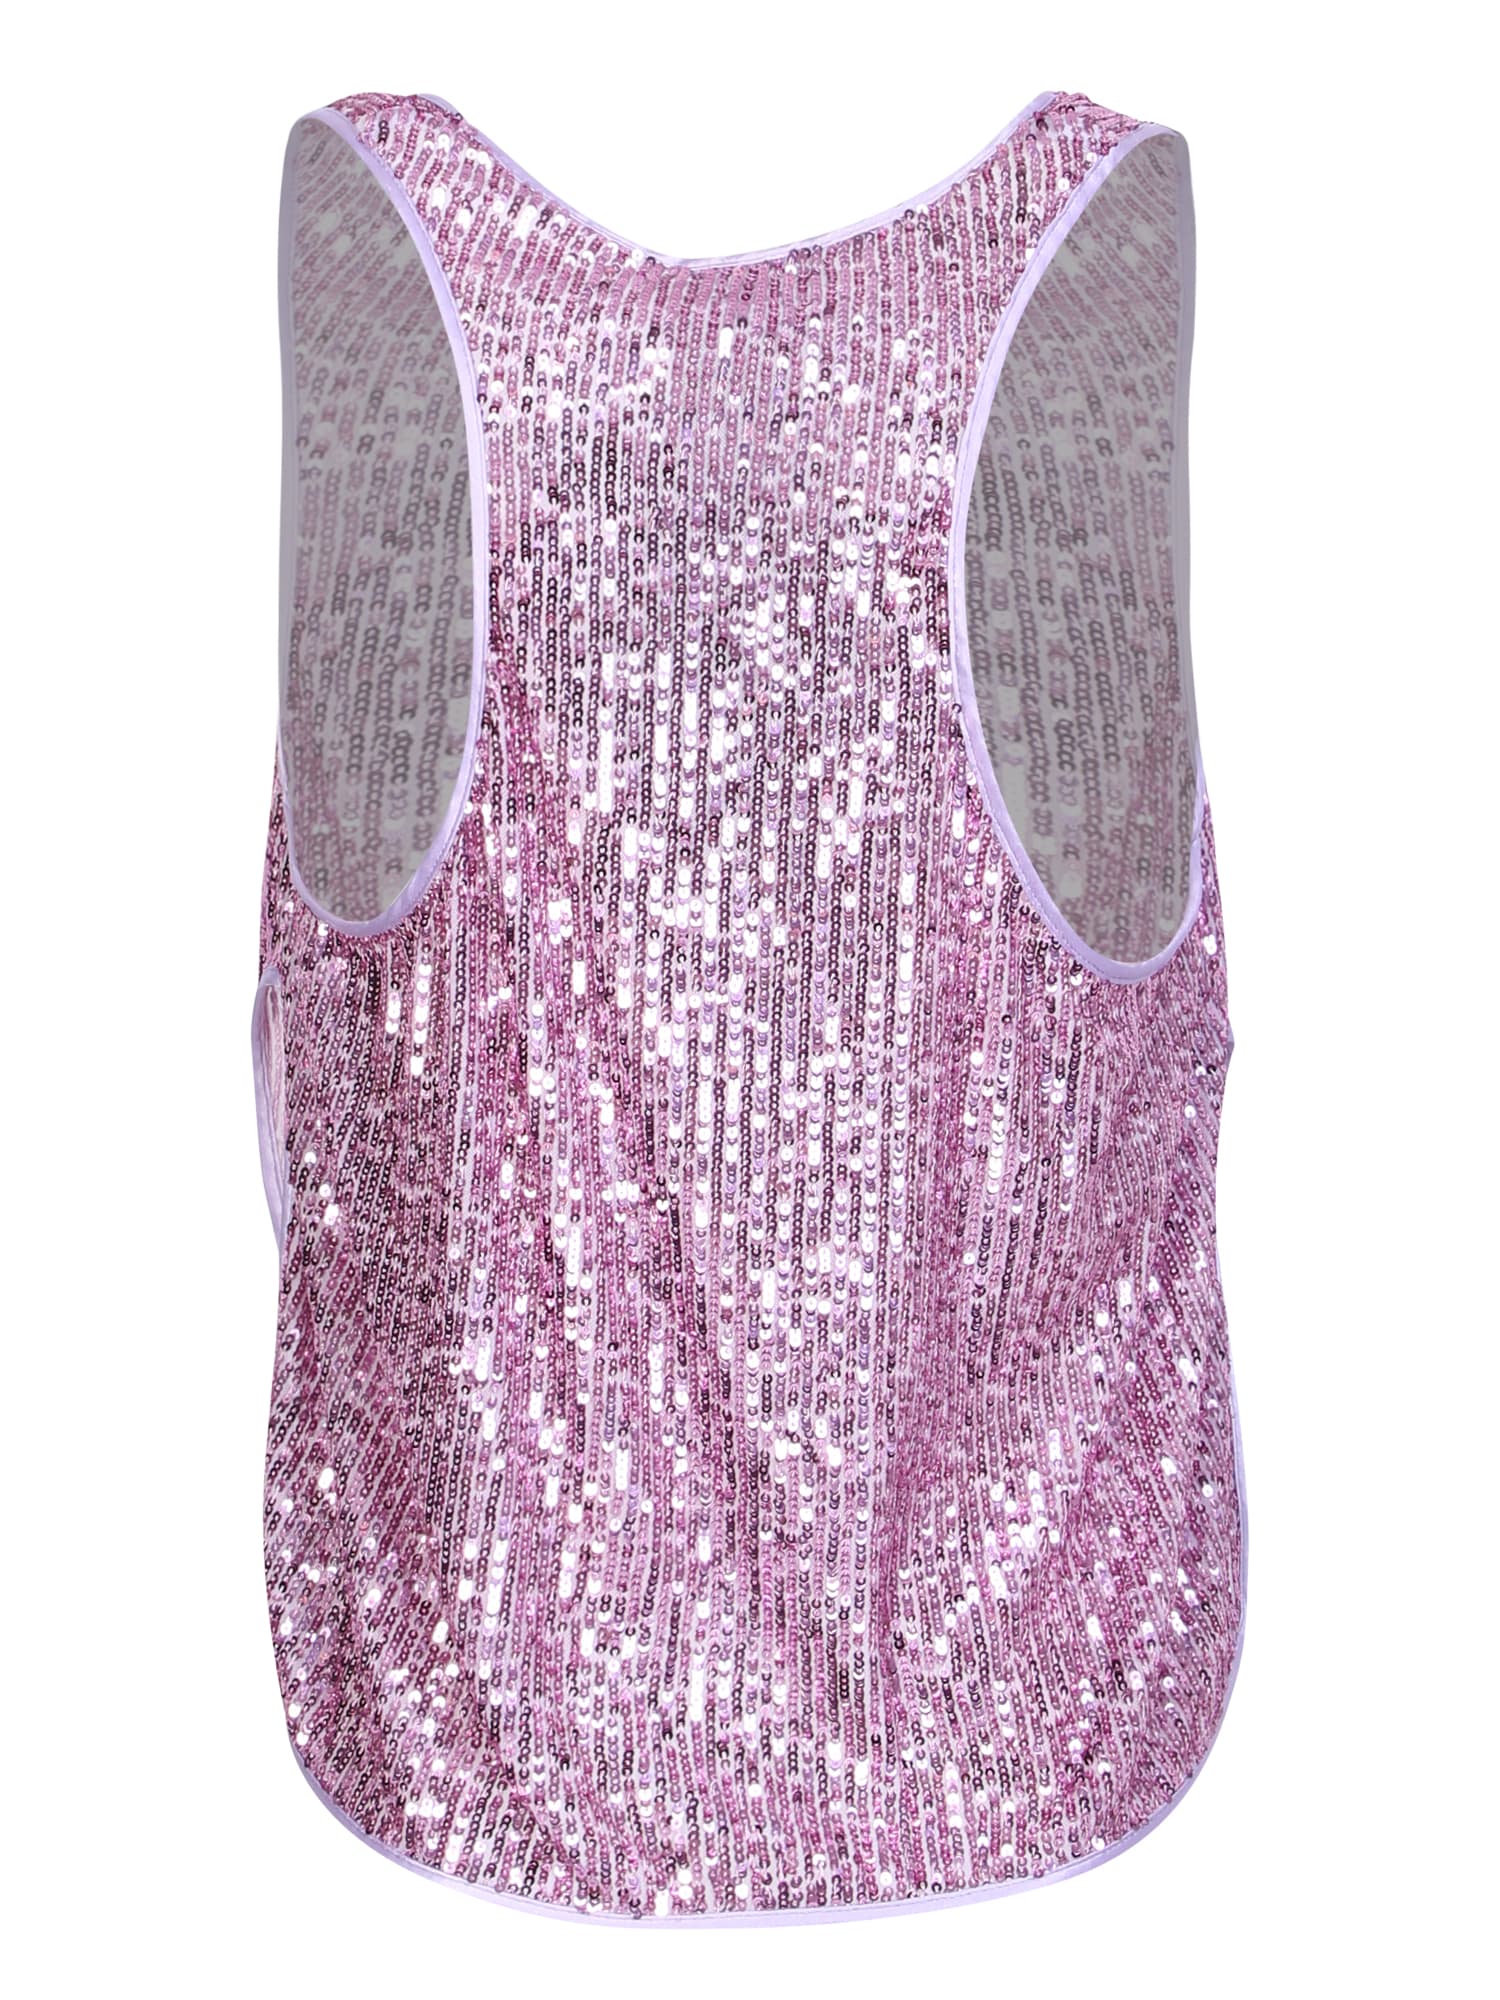 Tom Ford Sequin-embellished Tank Top | italist